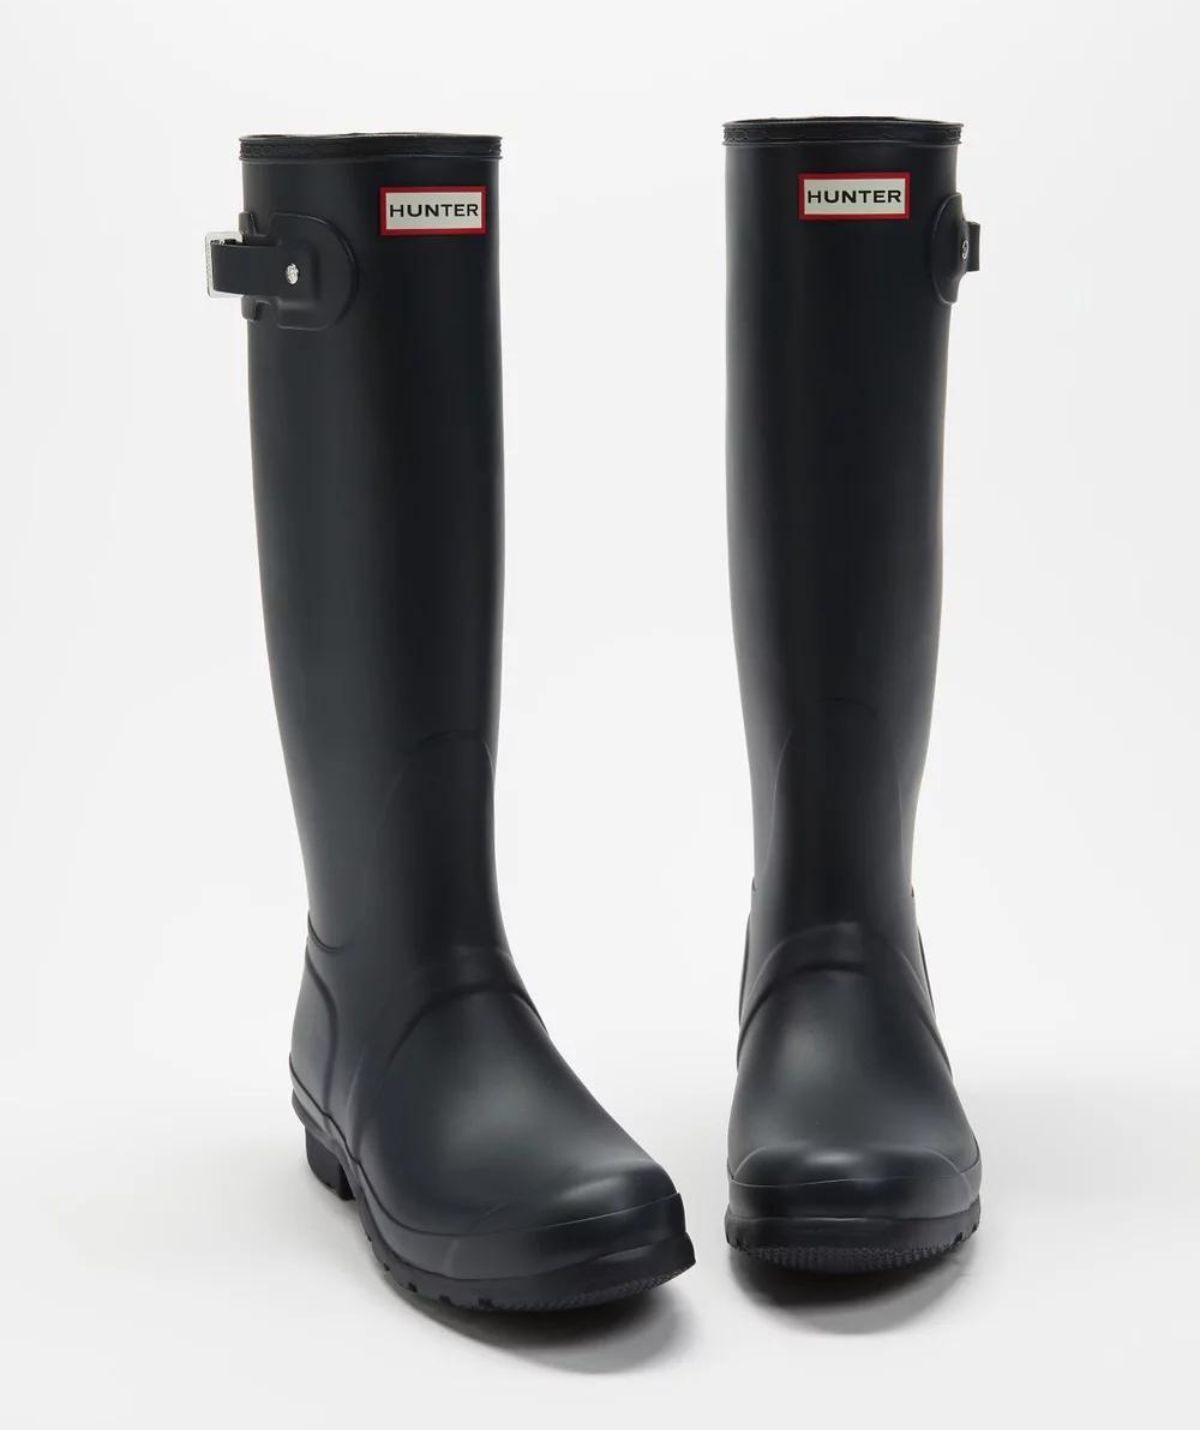 The Best Gumboots To Invest in This Season